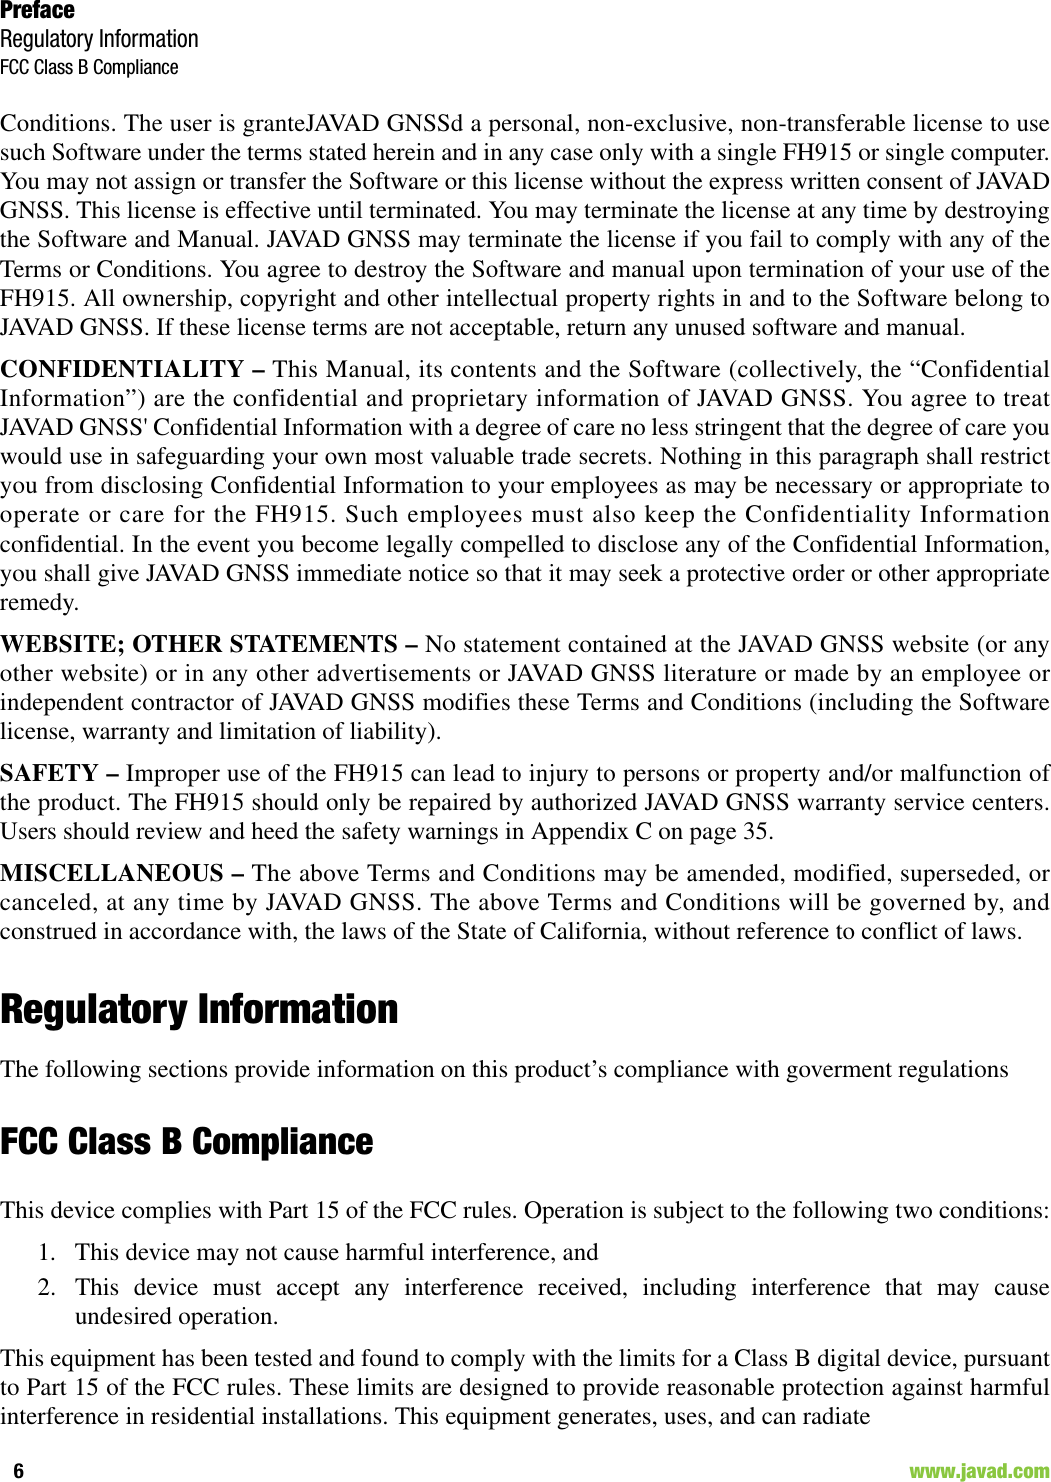 PrefaceRegulatory InformationFCC Class B Compliance6                                                                                                                    www.javad.comConditions. The user is granteJAVAD GNSSd a personal, non-exclusive, non-transferable license to usesuch Software under the terms stated herein and in any case only with a single FH915 or single computer.You may not assign or transfer the Software or this license without the express written consent of JAVADGNSS. This license is effective until terminated. You may terminate the license at any time by destroyingthe Software and Manual. JAVAD GNSS may terminate the license if you fail to comply with any of theTerms or Conditions. You agree to destroy the Software and manual upon termination of your use of theFH915. All ownership, copyright and other intellectual property rights in and to the Software belong toJAVAD GNSS. If these license terms are not acceptable, return any unused software and manual.CONFIDENTIALITY – This Manual, its contents and the Software (collectively, the “ConfidentialInformation”) are the confidential and proprietary information of JAVAD GNSS. You agree to treatJAVAD GNSS&apos; Confidential Information with a degree of care no less stringent that the degree of care youwould use in safeguarding your own most valuable trade secrets. Nothing in this paragraph shall restrictyou from disclosing Confidential Information to your employees as may be necessary or appropriate tooperate or care for the FH915. Such employees must also keep the Confidentiality Informationconfidential. In the event you become legally compelled to disclose any of the Confidential Information,you shall give JAVAD GNSS immediate notice so that it may seek a protective order or other appropriateremedy.WEBSITE; OTHER STATEMENTS – No statement contained at the JAVAD GNSS website (or anyother website) or in any other advertisements or JAVAD GNSS literature or made by an employee orindependent contractor of JAVAD GNSS modifies these Terms and Conditions (including the Softwarelicense, warranty and limitation of liability). SAFETY – Improper use of the FH915 can lead to injury to persons or property and/or malfunction ofthe product. The FH915 should only be repaired by authorized JAVAD GNSS warranty service centers.Users should review and heed the safety warnings in Appendix C on page 35.MISCELLANEOUS – The above Terms and Conditions may be amended, modified, superseded, orcanceled, at any time by JAVAD GNSS. The above Terms and Conditions will be governed by, andconstrued in accordance with, the laws of the State of California, without reference to conflict of laws.Regulatory InformationThe following sections provide information on this product’s compliance with goverment regulationsFCC Class B ComplianceThis device complies with Part 15 of the FCC rules. Operation is subject to the following two conditions:1. This device may not cause harmful interference, and 2. This device must accept any interference received, including interference that may causeundesired operation.This equipment has been tested and found to comply with the limits for a Class B digital device, pursuantto Part 15 of the FCC rules. These limits are designed to provide reasonable protection against harmfulinterference in residential installations. This equipment generates, uses, and can radiate